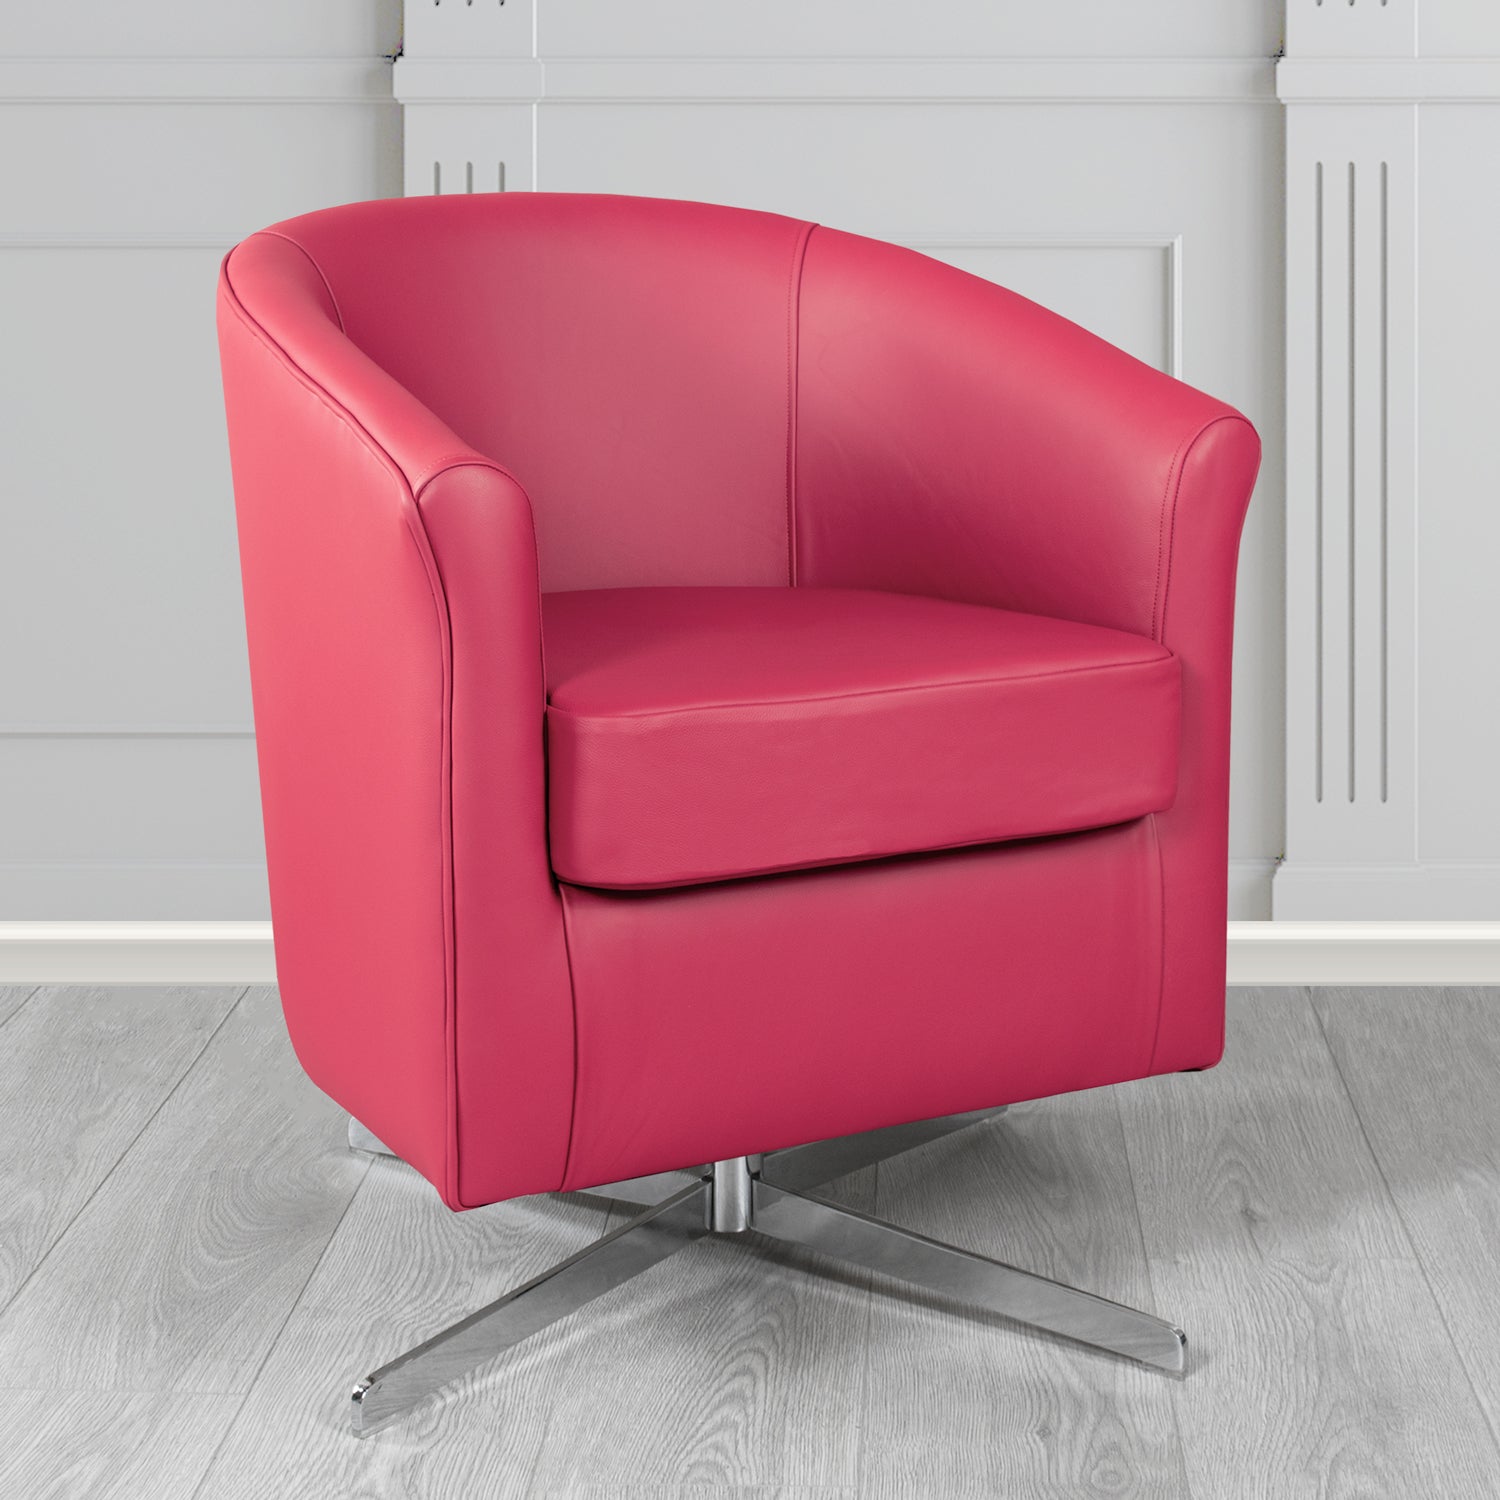 Cannes Swivel Tub Chair in Shelly Anemone Crib 5 Genuine Leather - The Tub Chair Shop